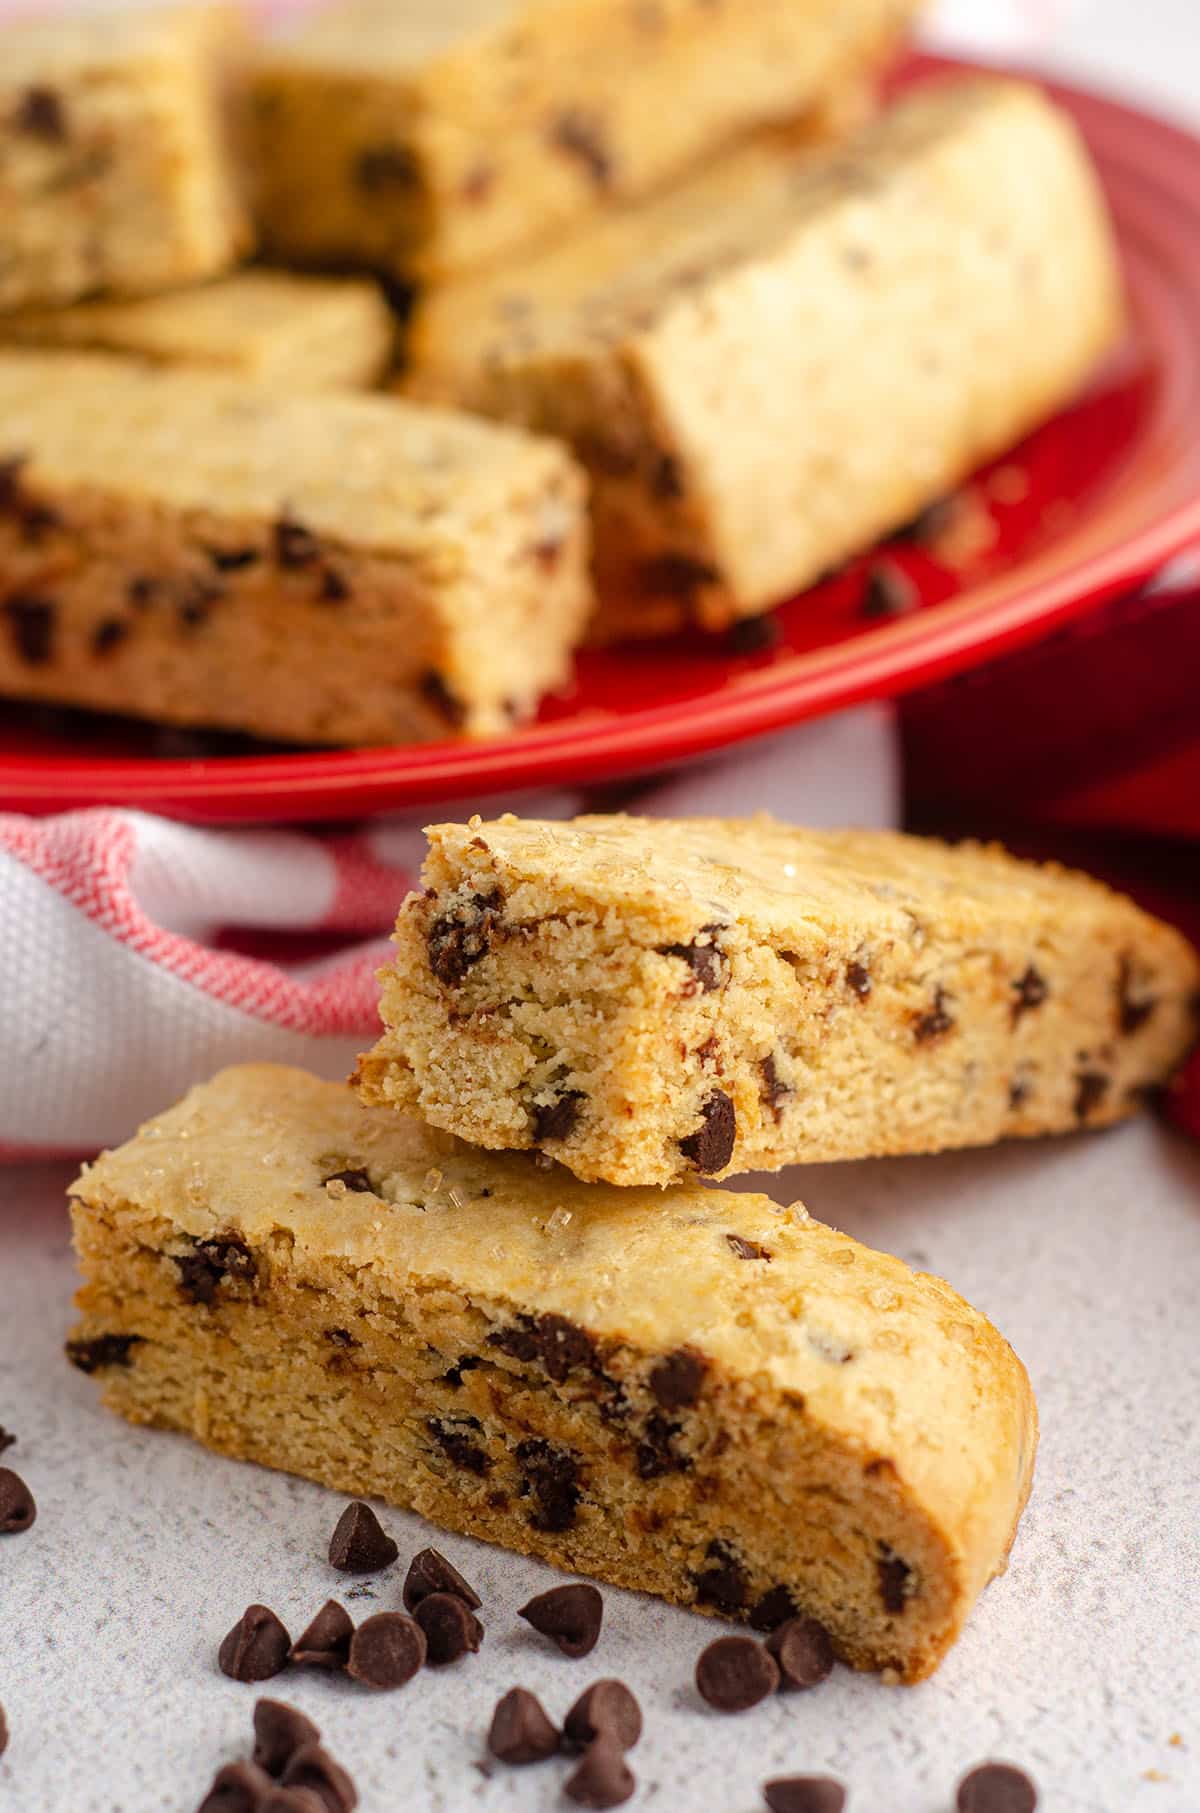 chocolate chip biscotti sitting on and in front of a red plate with mini chocolate chips scattered around